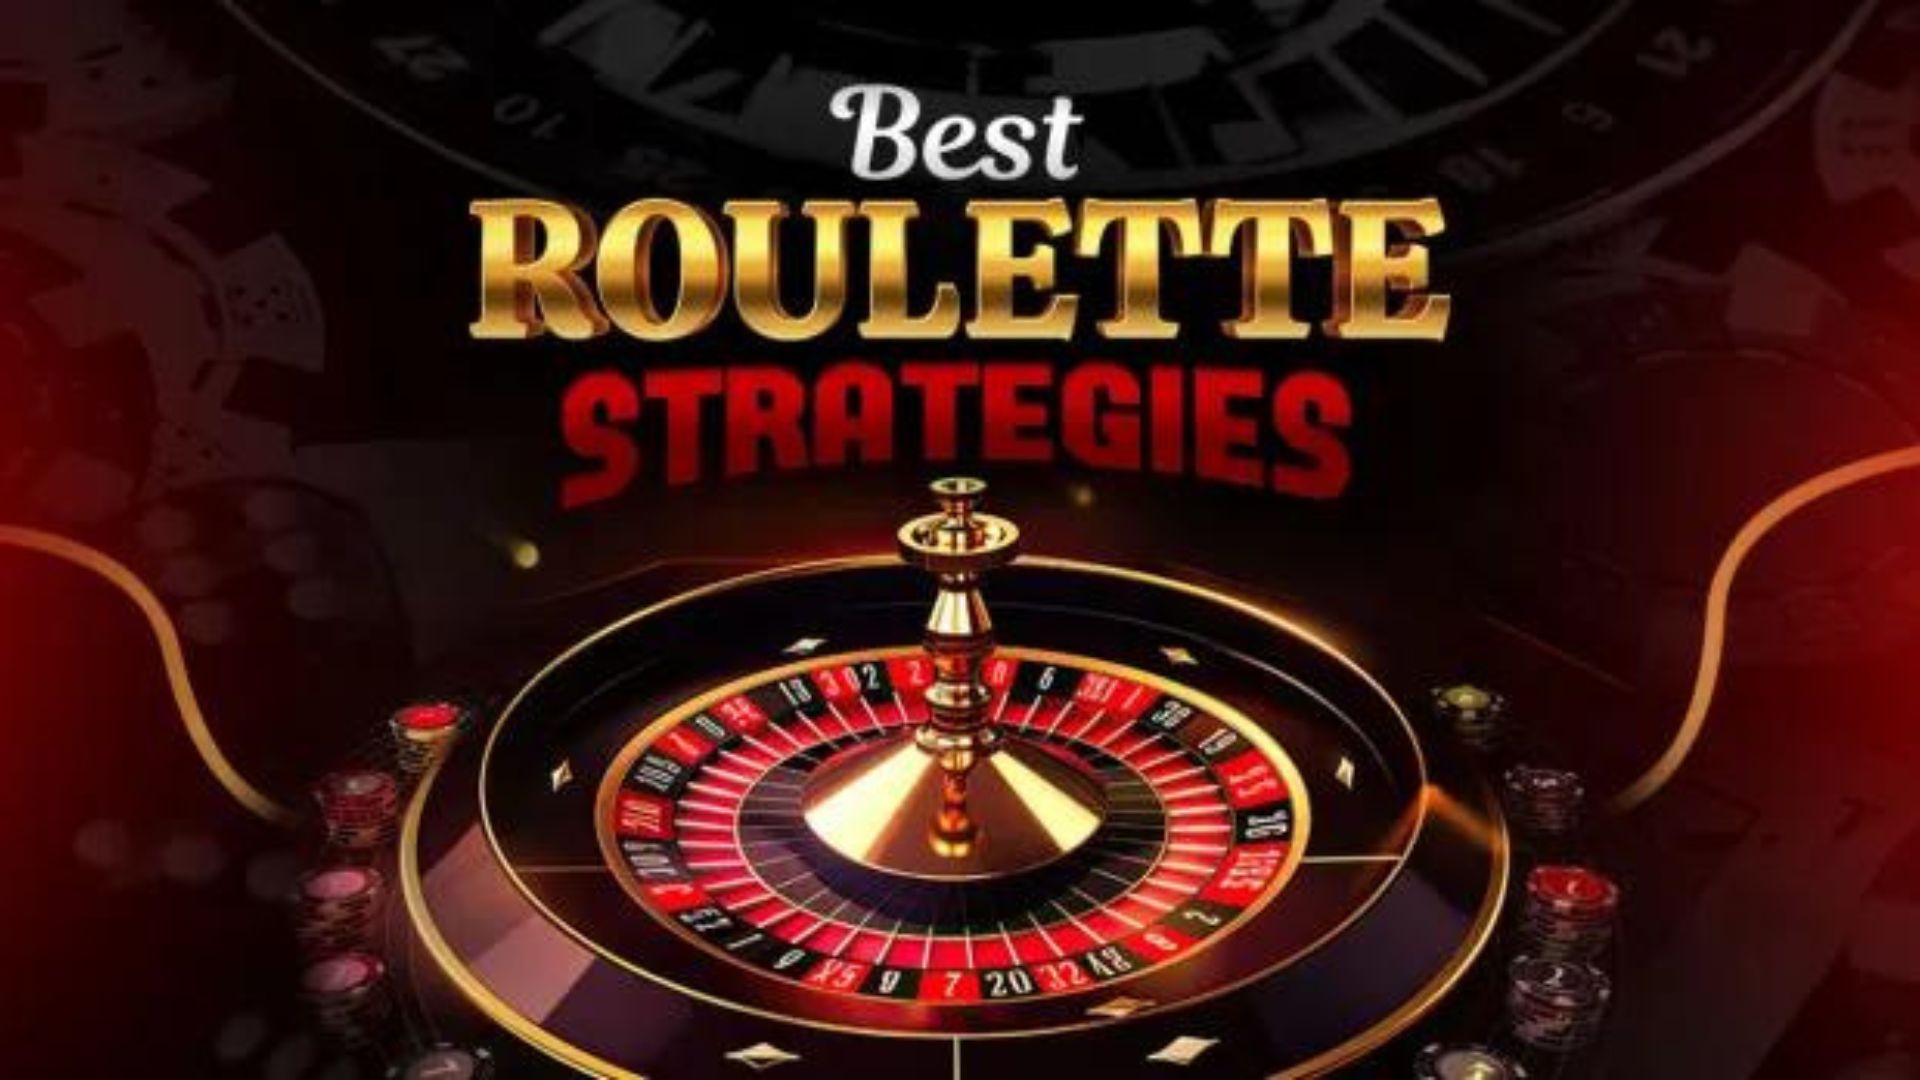 A clear picture of roulette riches strategies.